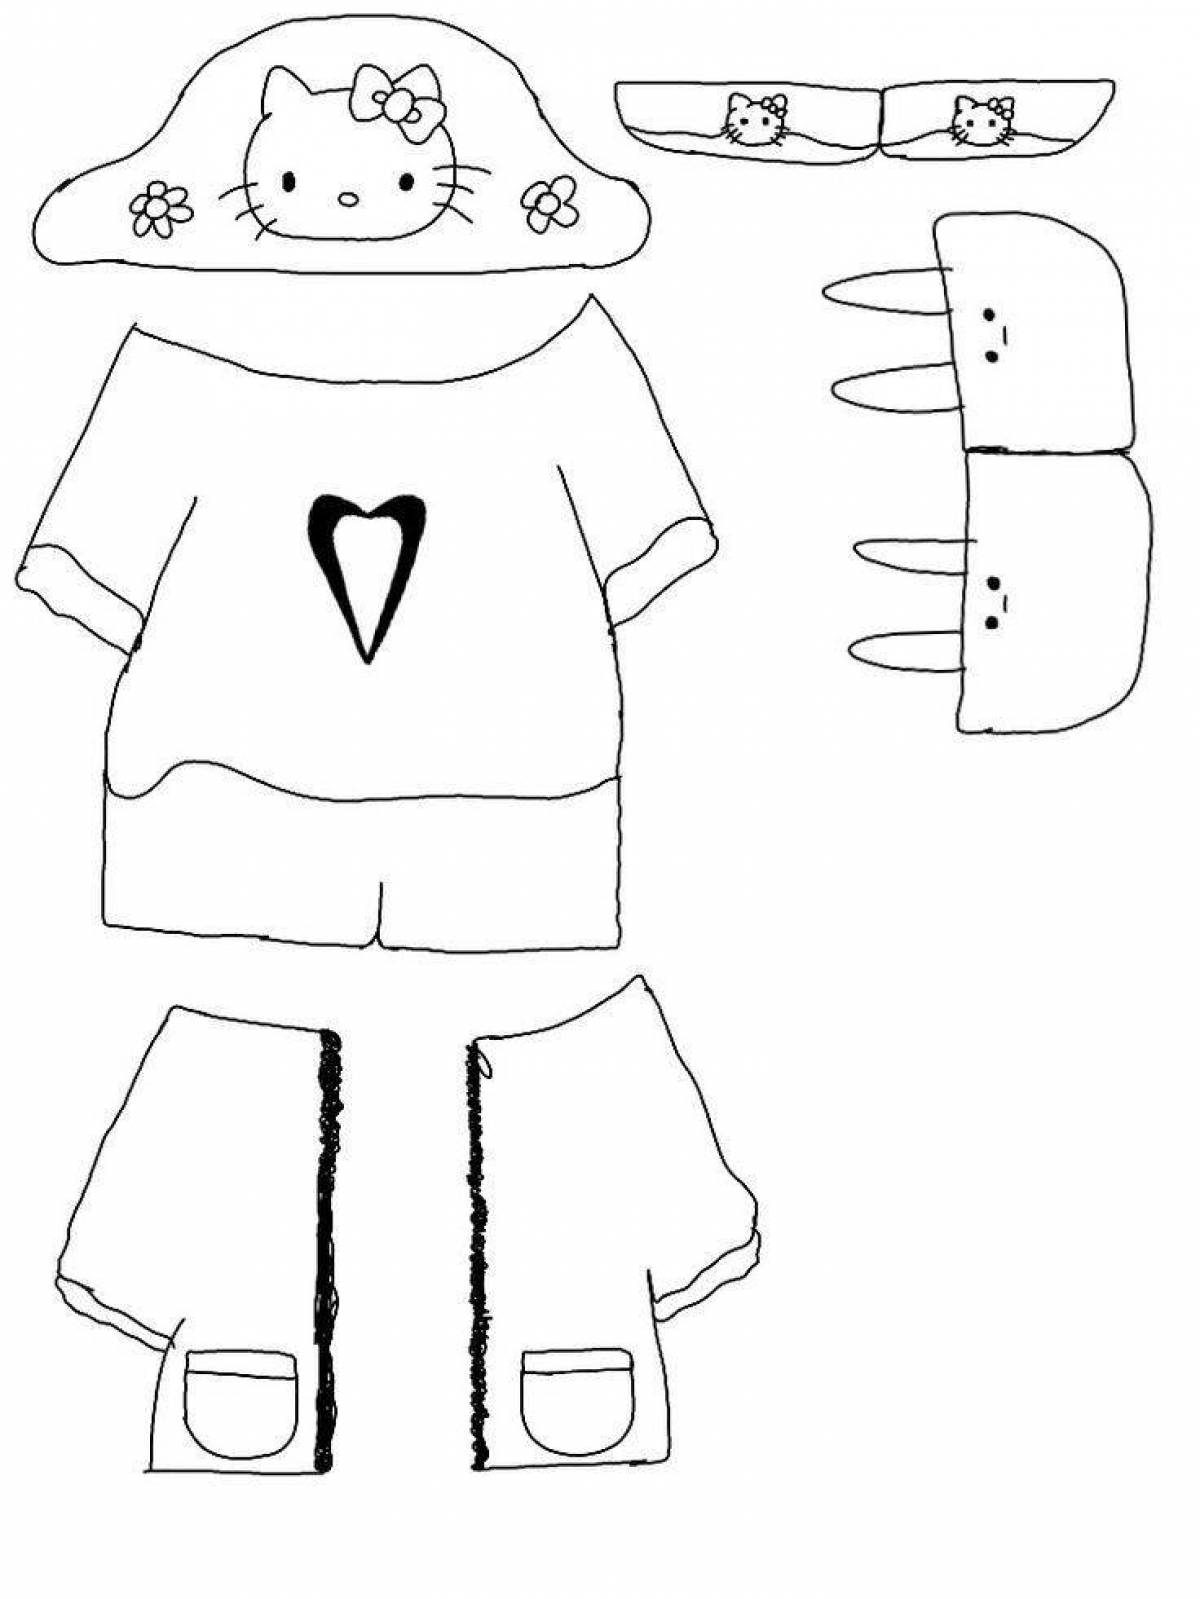 Lalafanfan coloring book with colorblocked clothes